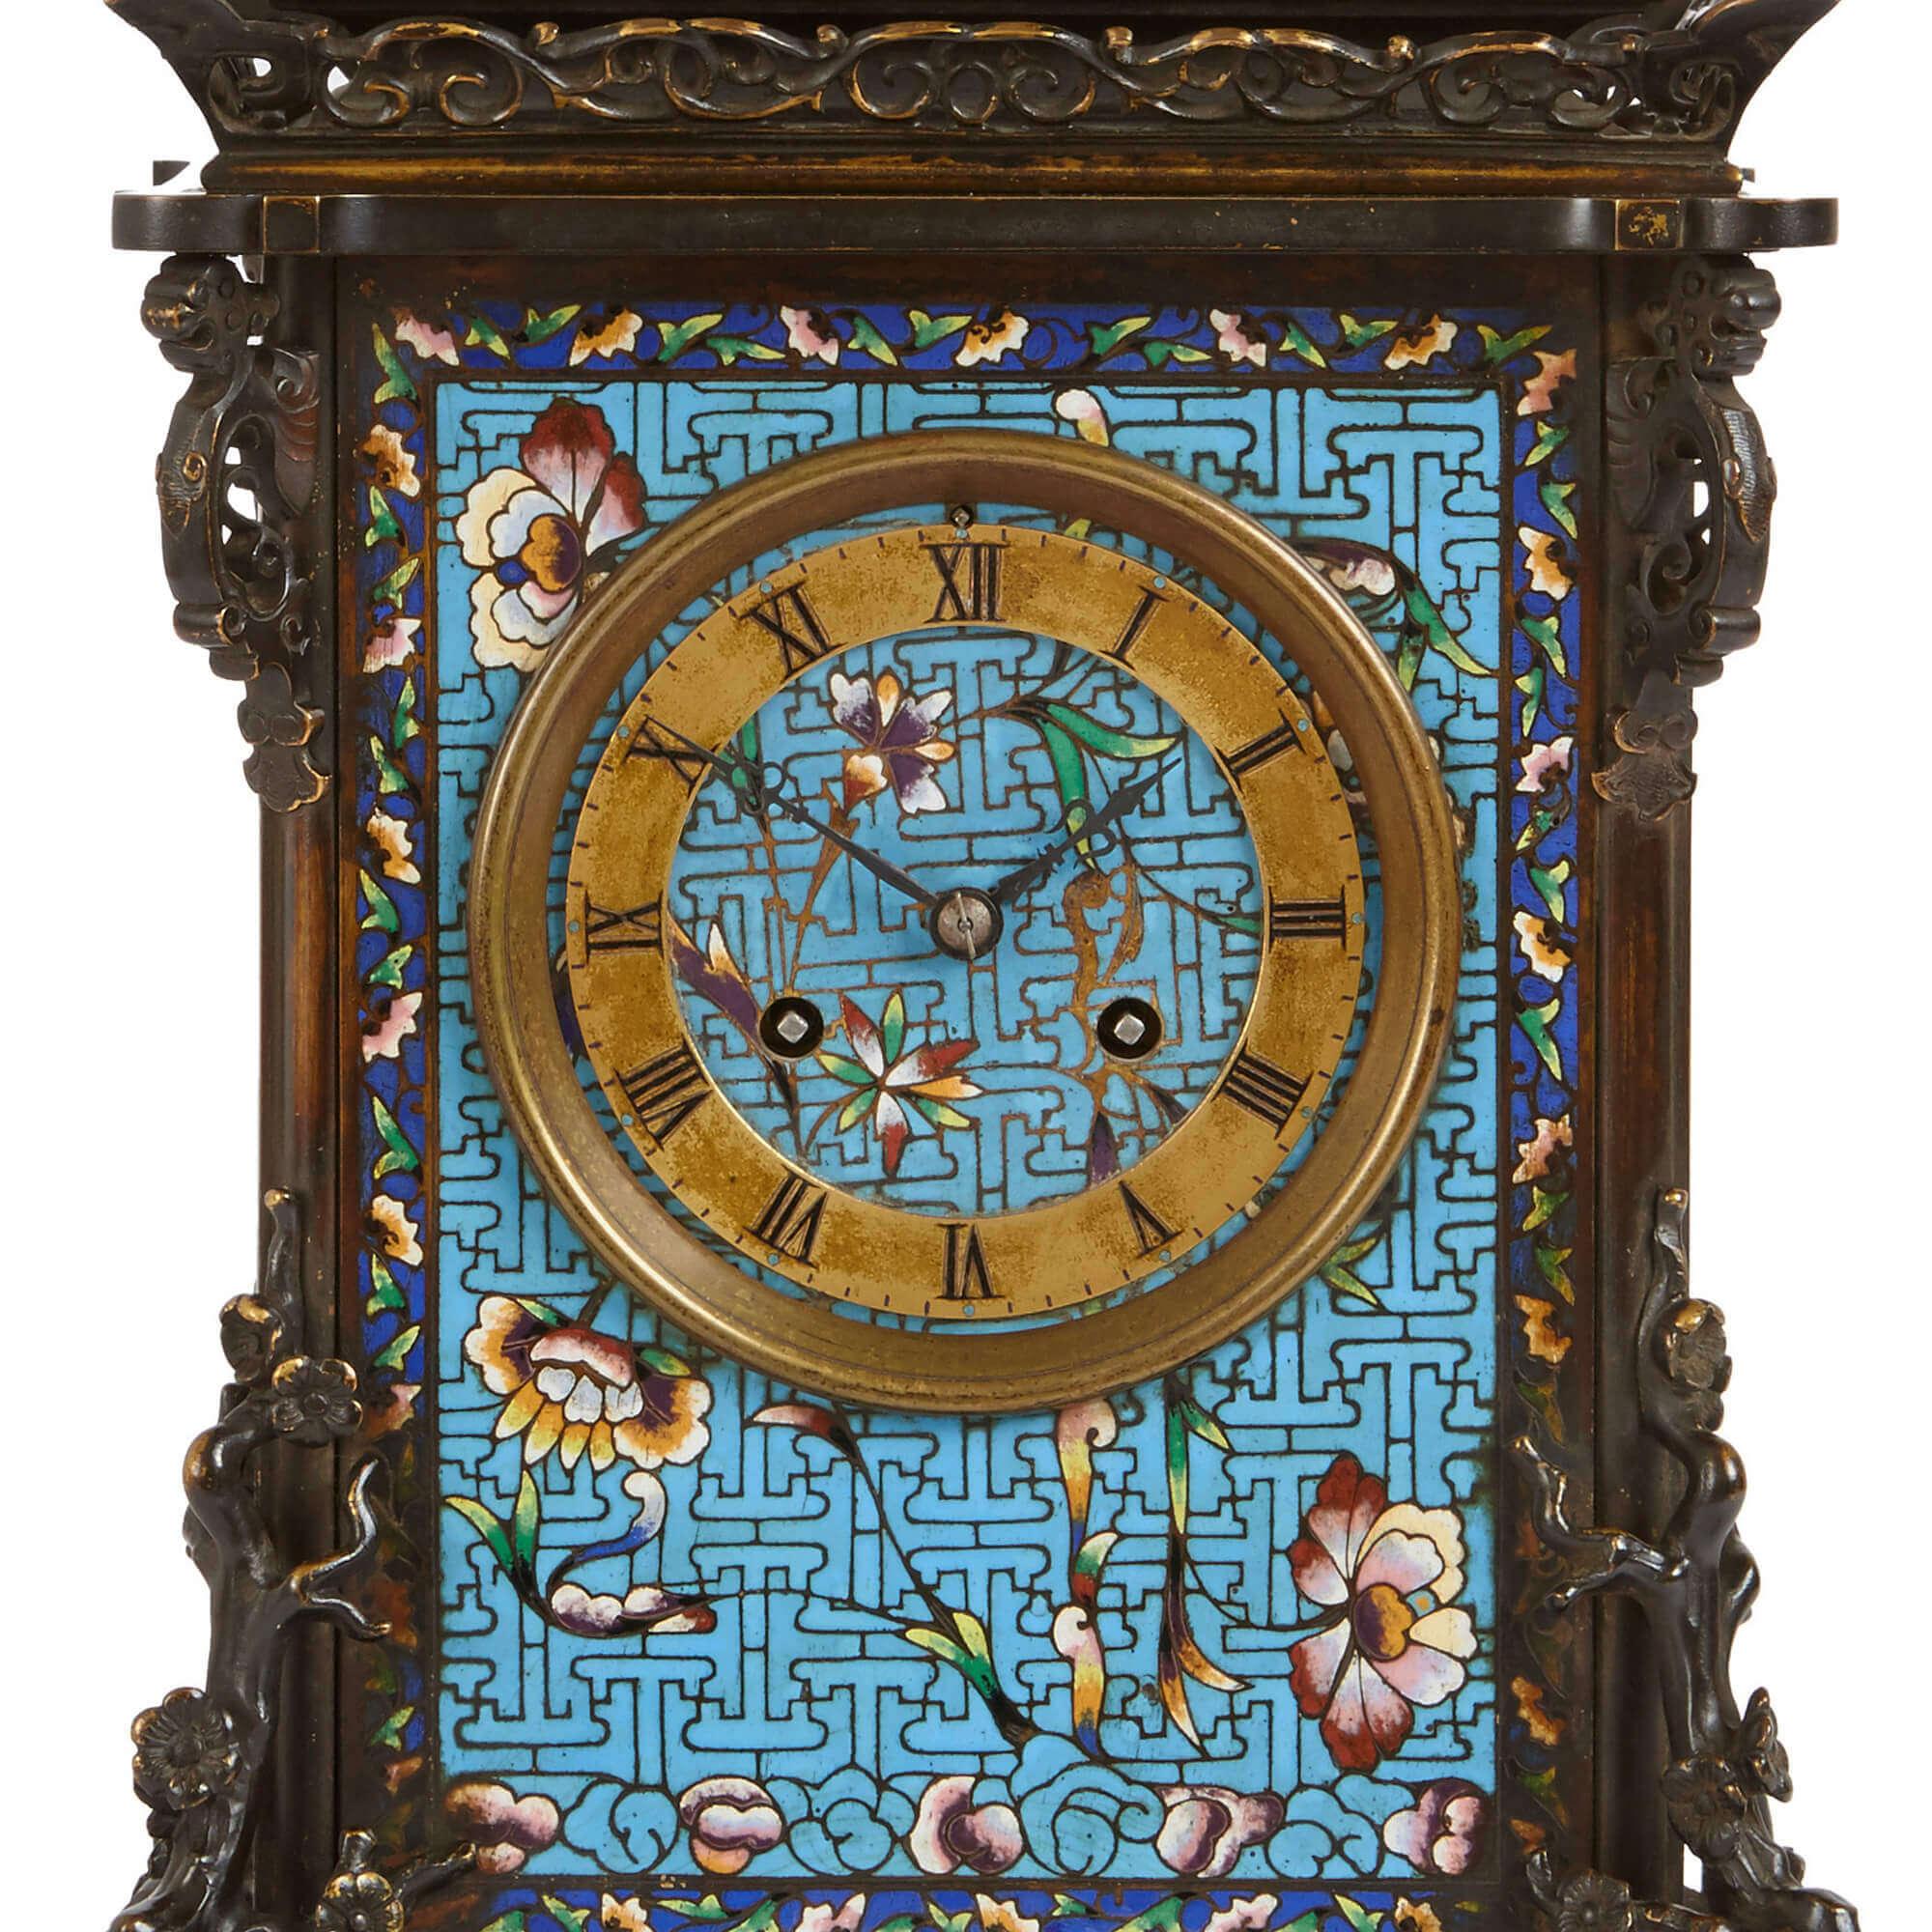 Antique French Japonisme Mantel Clock with Floral Champlevé Enamel In Good Condition For Sale In London, GB